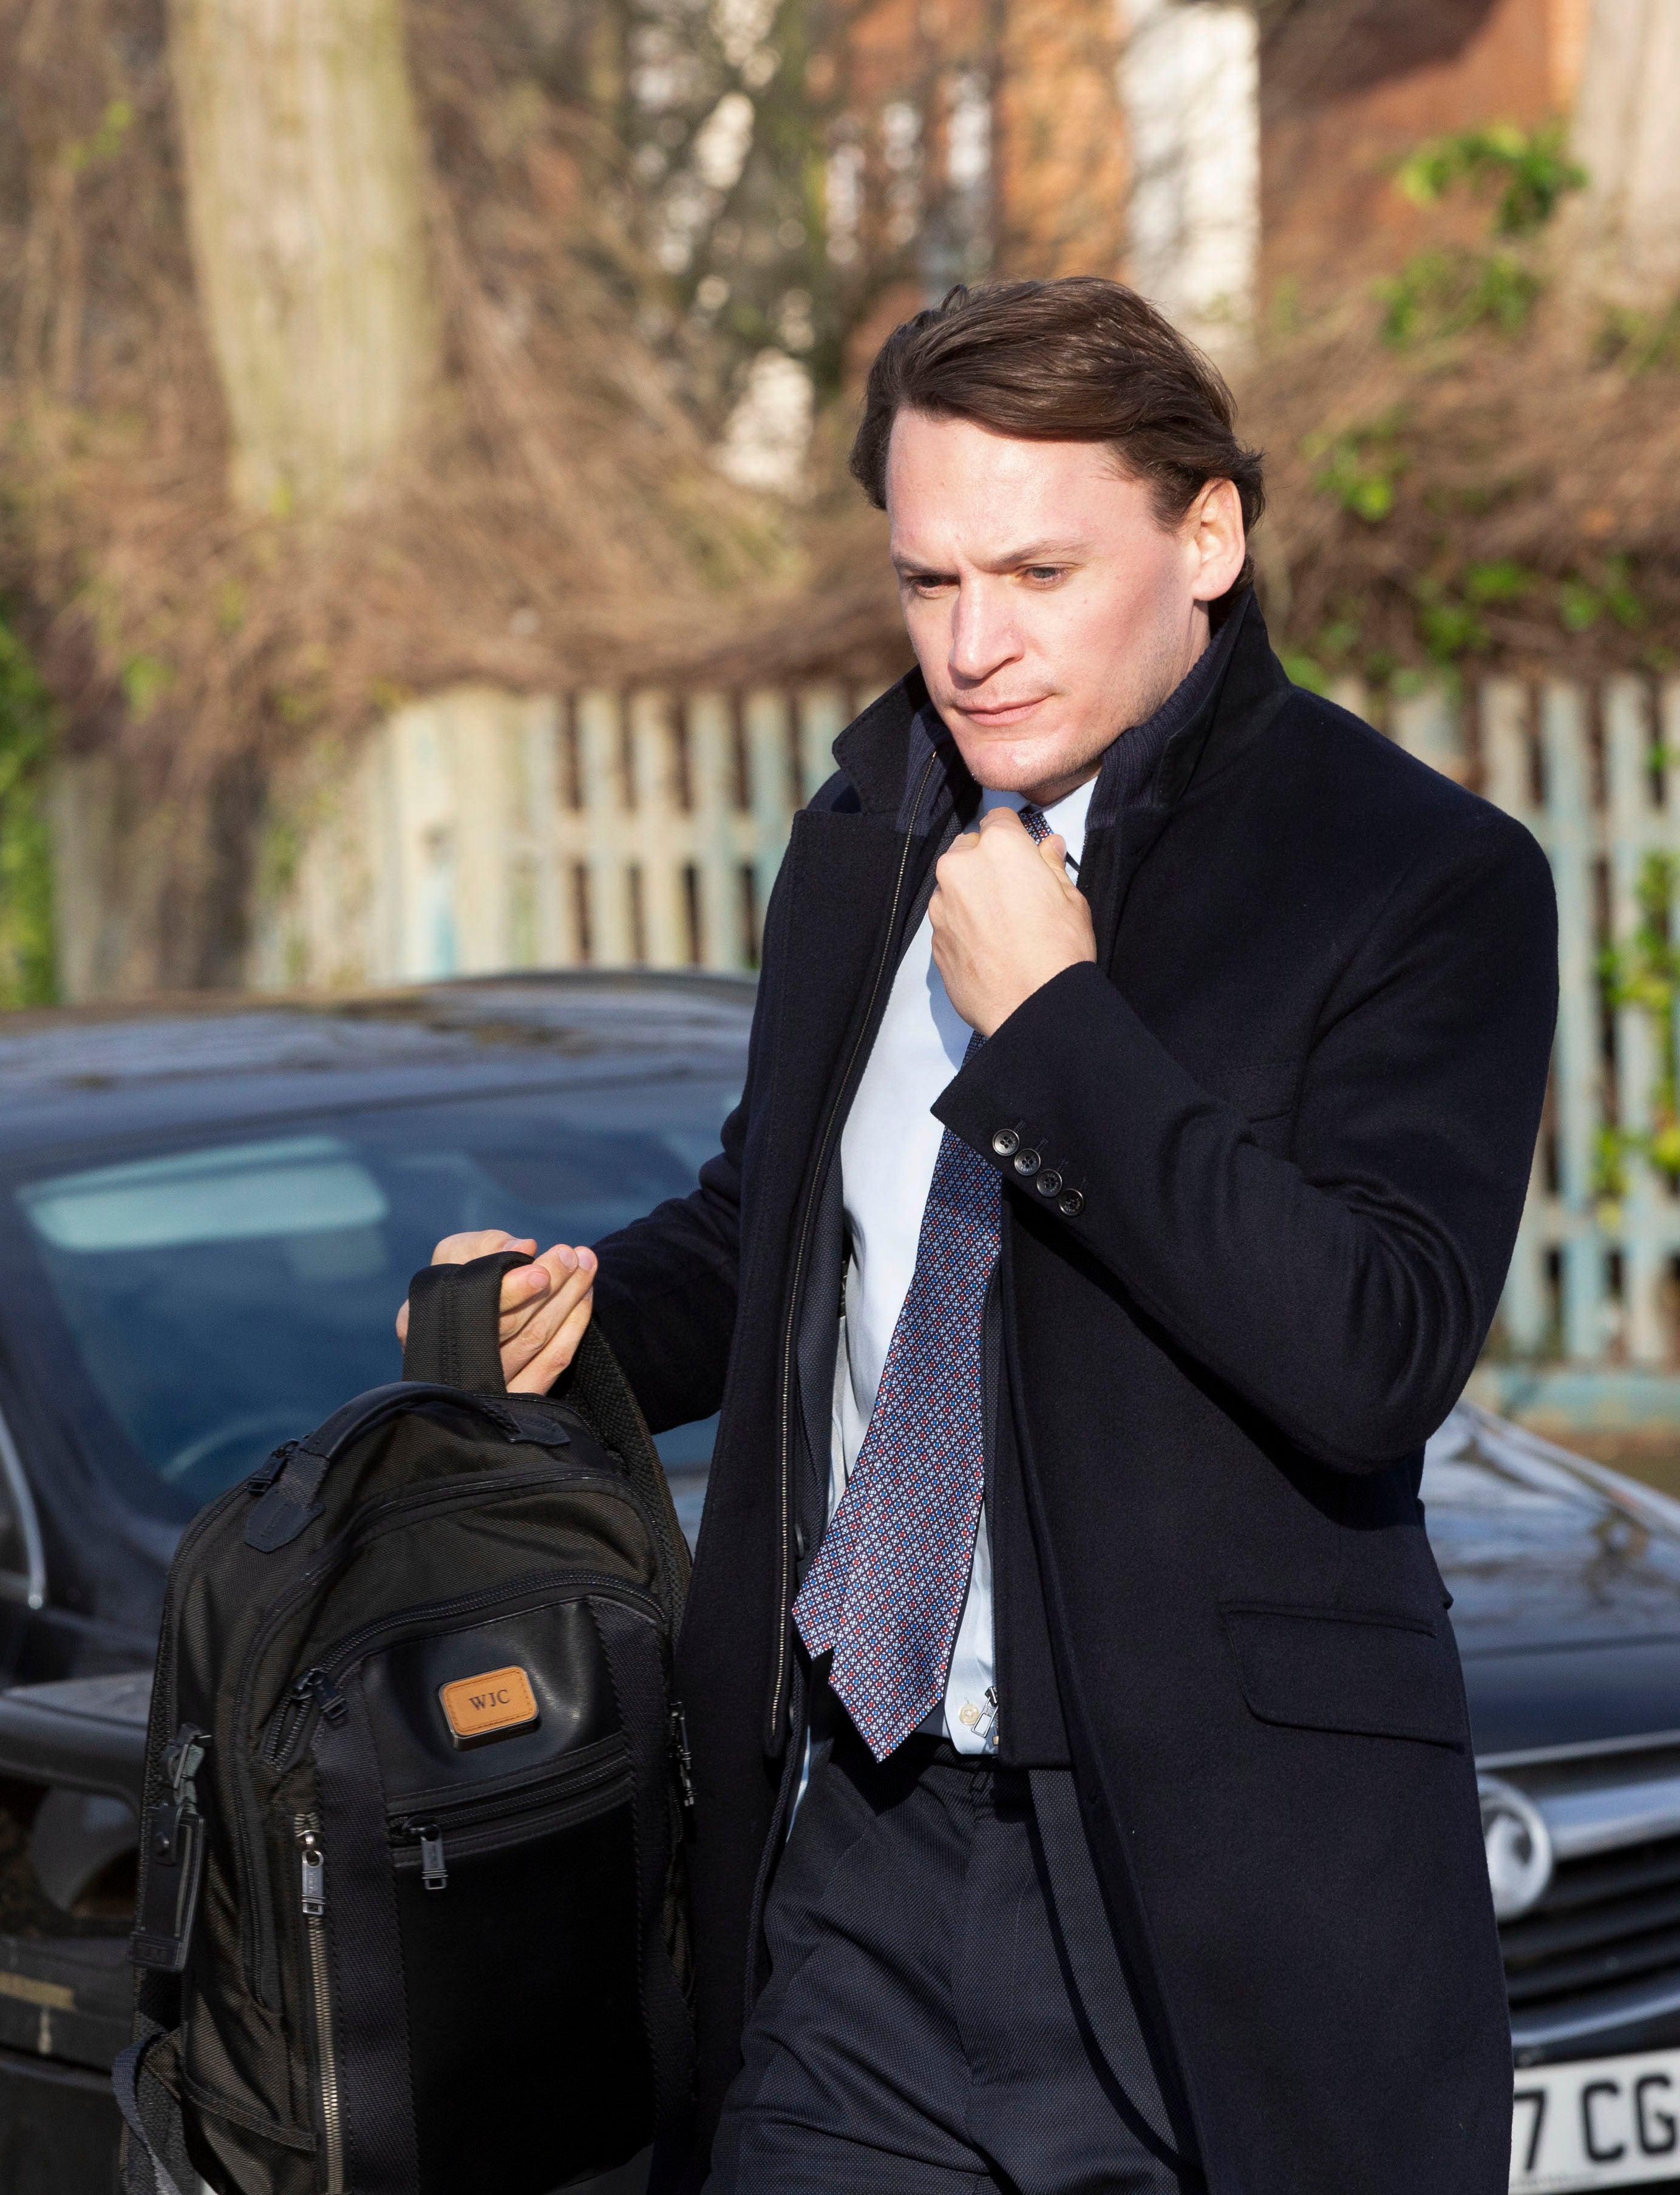 William Clegg arrives at Isleworth Crown Court, west London (Steve Parsons/PA)